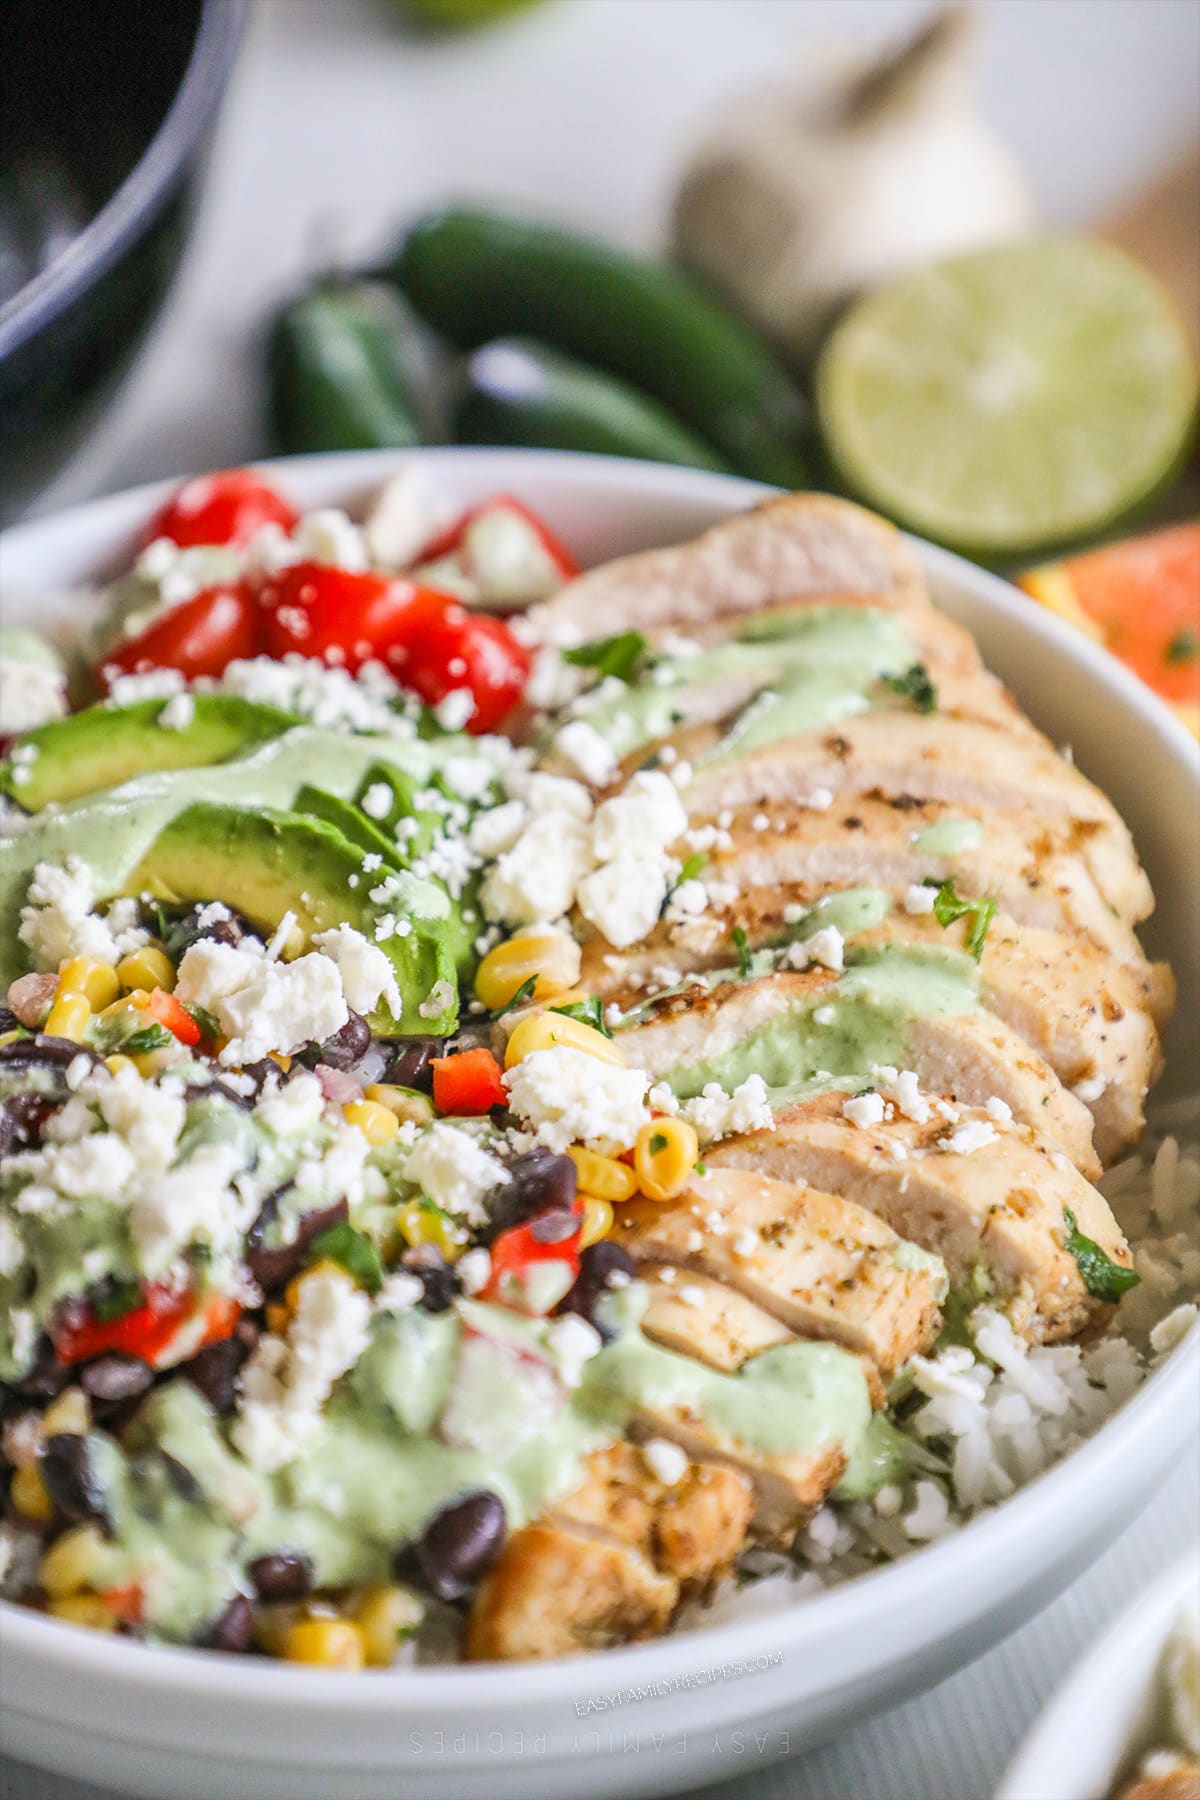 A chicken baja bowl in a white dish.